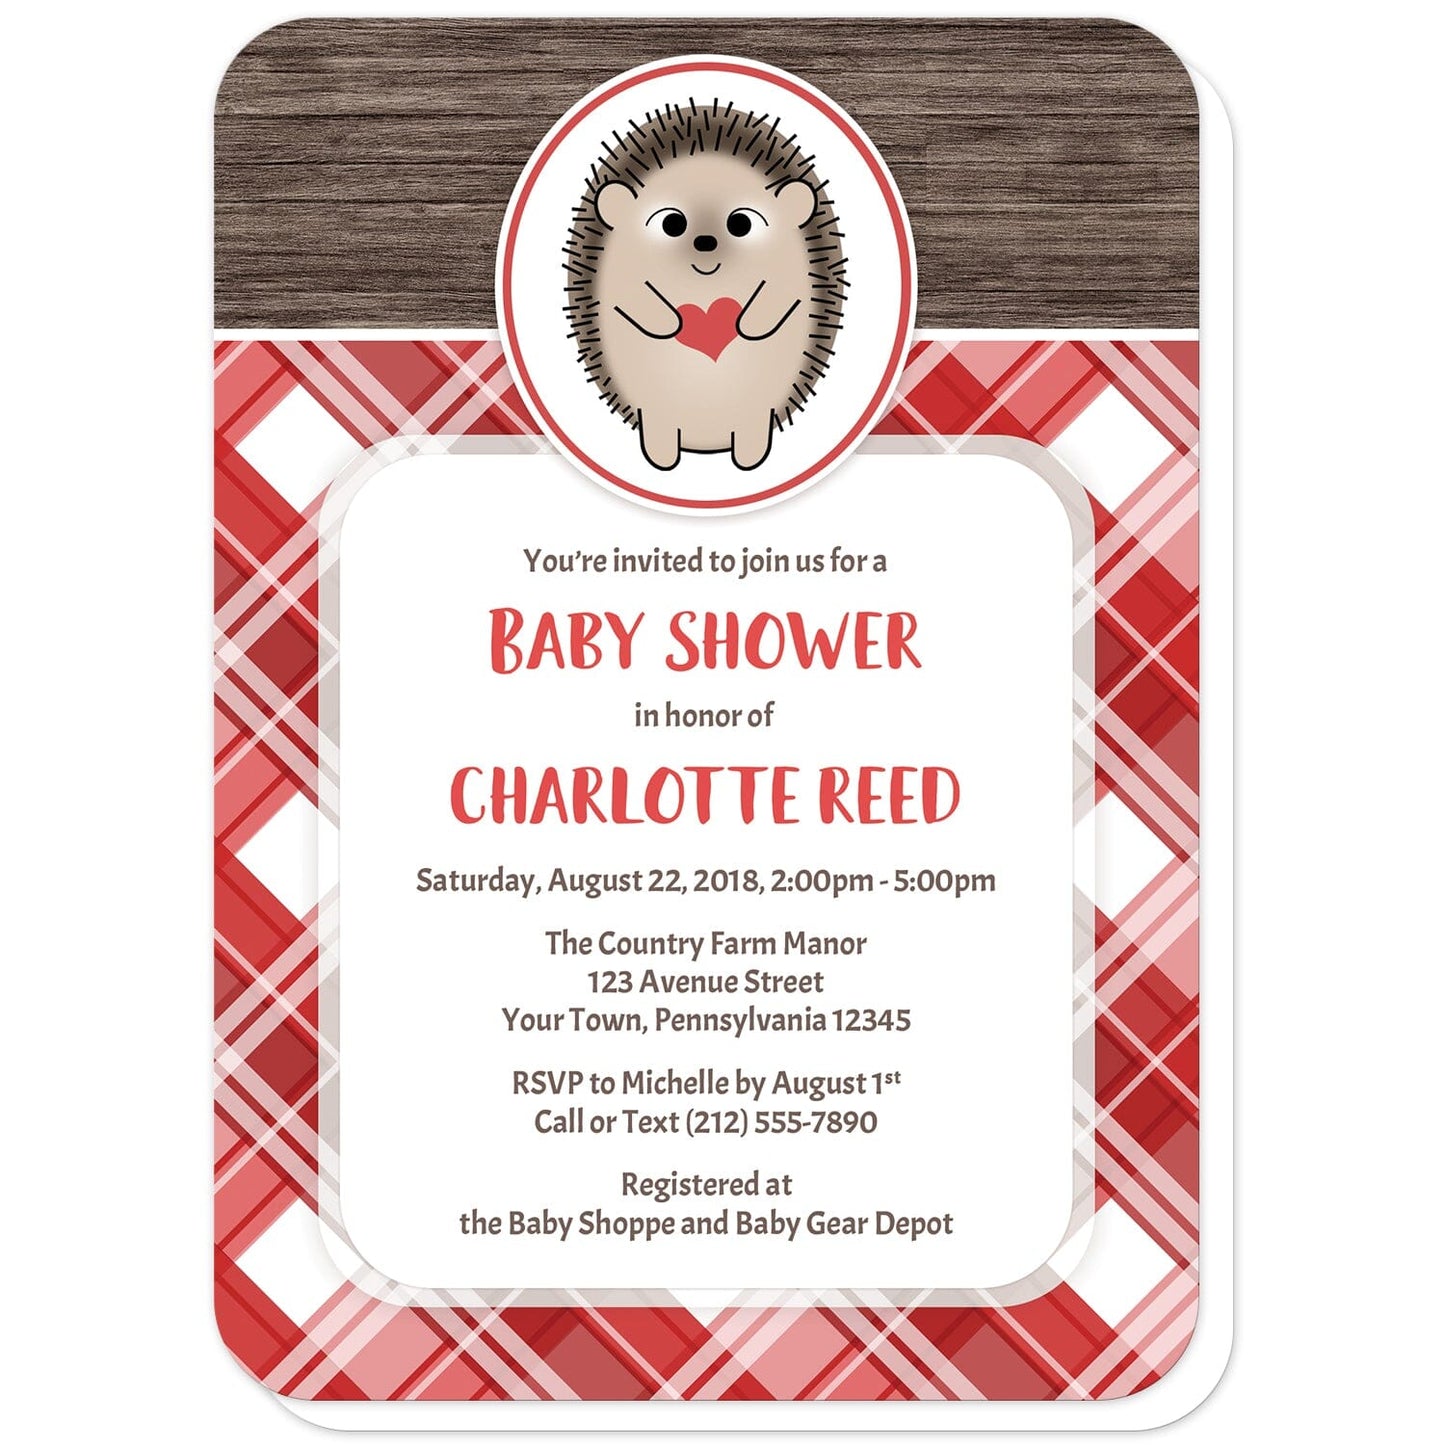 Rustic Hedgehog Heart Red Plaid Baby Shower Invitations (with rounded corners) at Artistically Invited. Adorable rustic hedgehog heart red plaid baby shower invitations that are illustrated with a cute and smiling hedgehog in a white and red oval over a rustic brown wood background along the top and a red plaid pattern background on the bottom. Your personalized baby shower celebration details are custom printed in red and brown in a white rectangular area over the red plaid pattern.